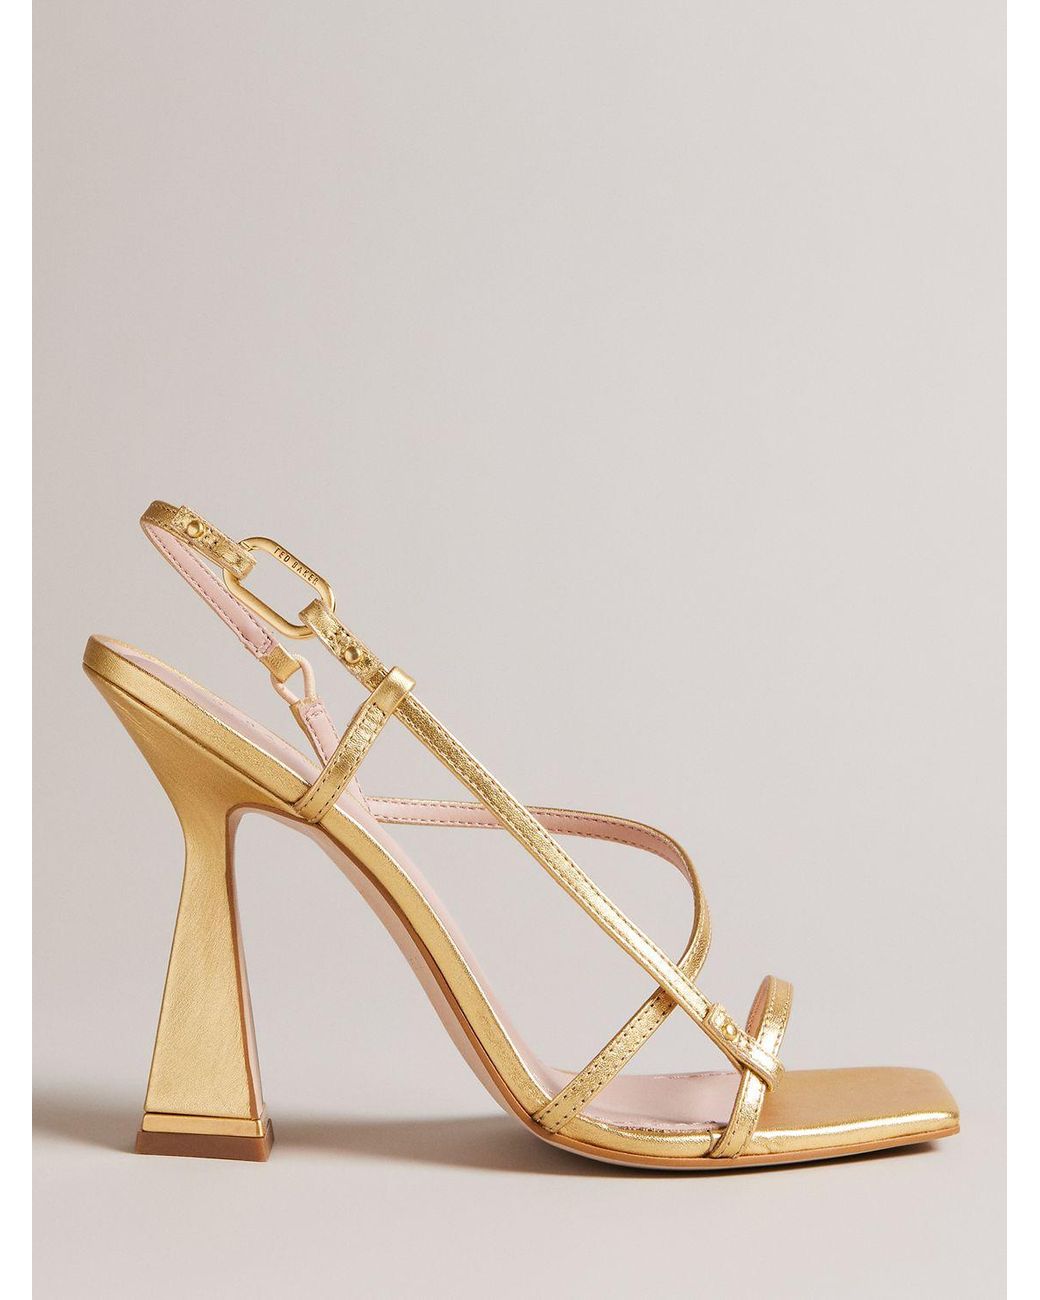 Ted Baker Cayena High Heel Leather Sandals in Natural | Lyst UK